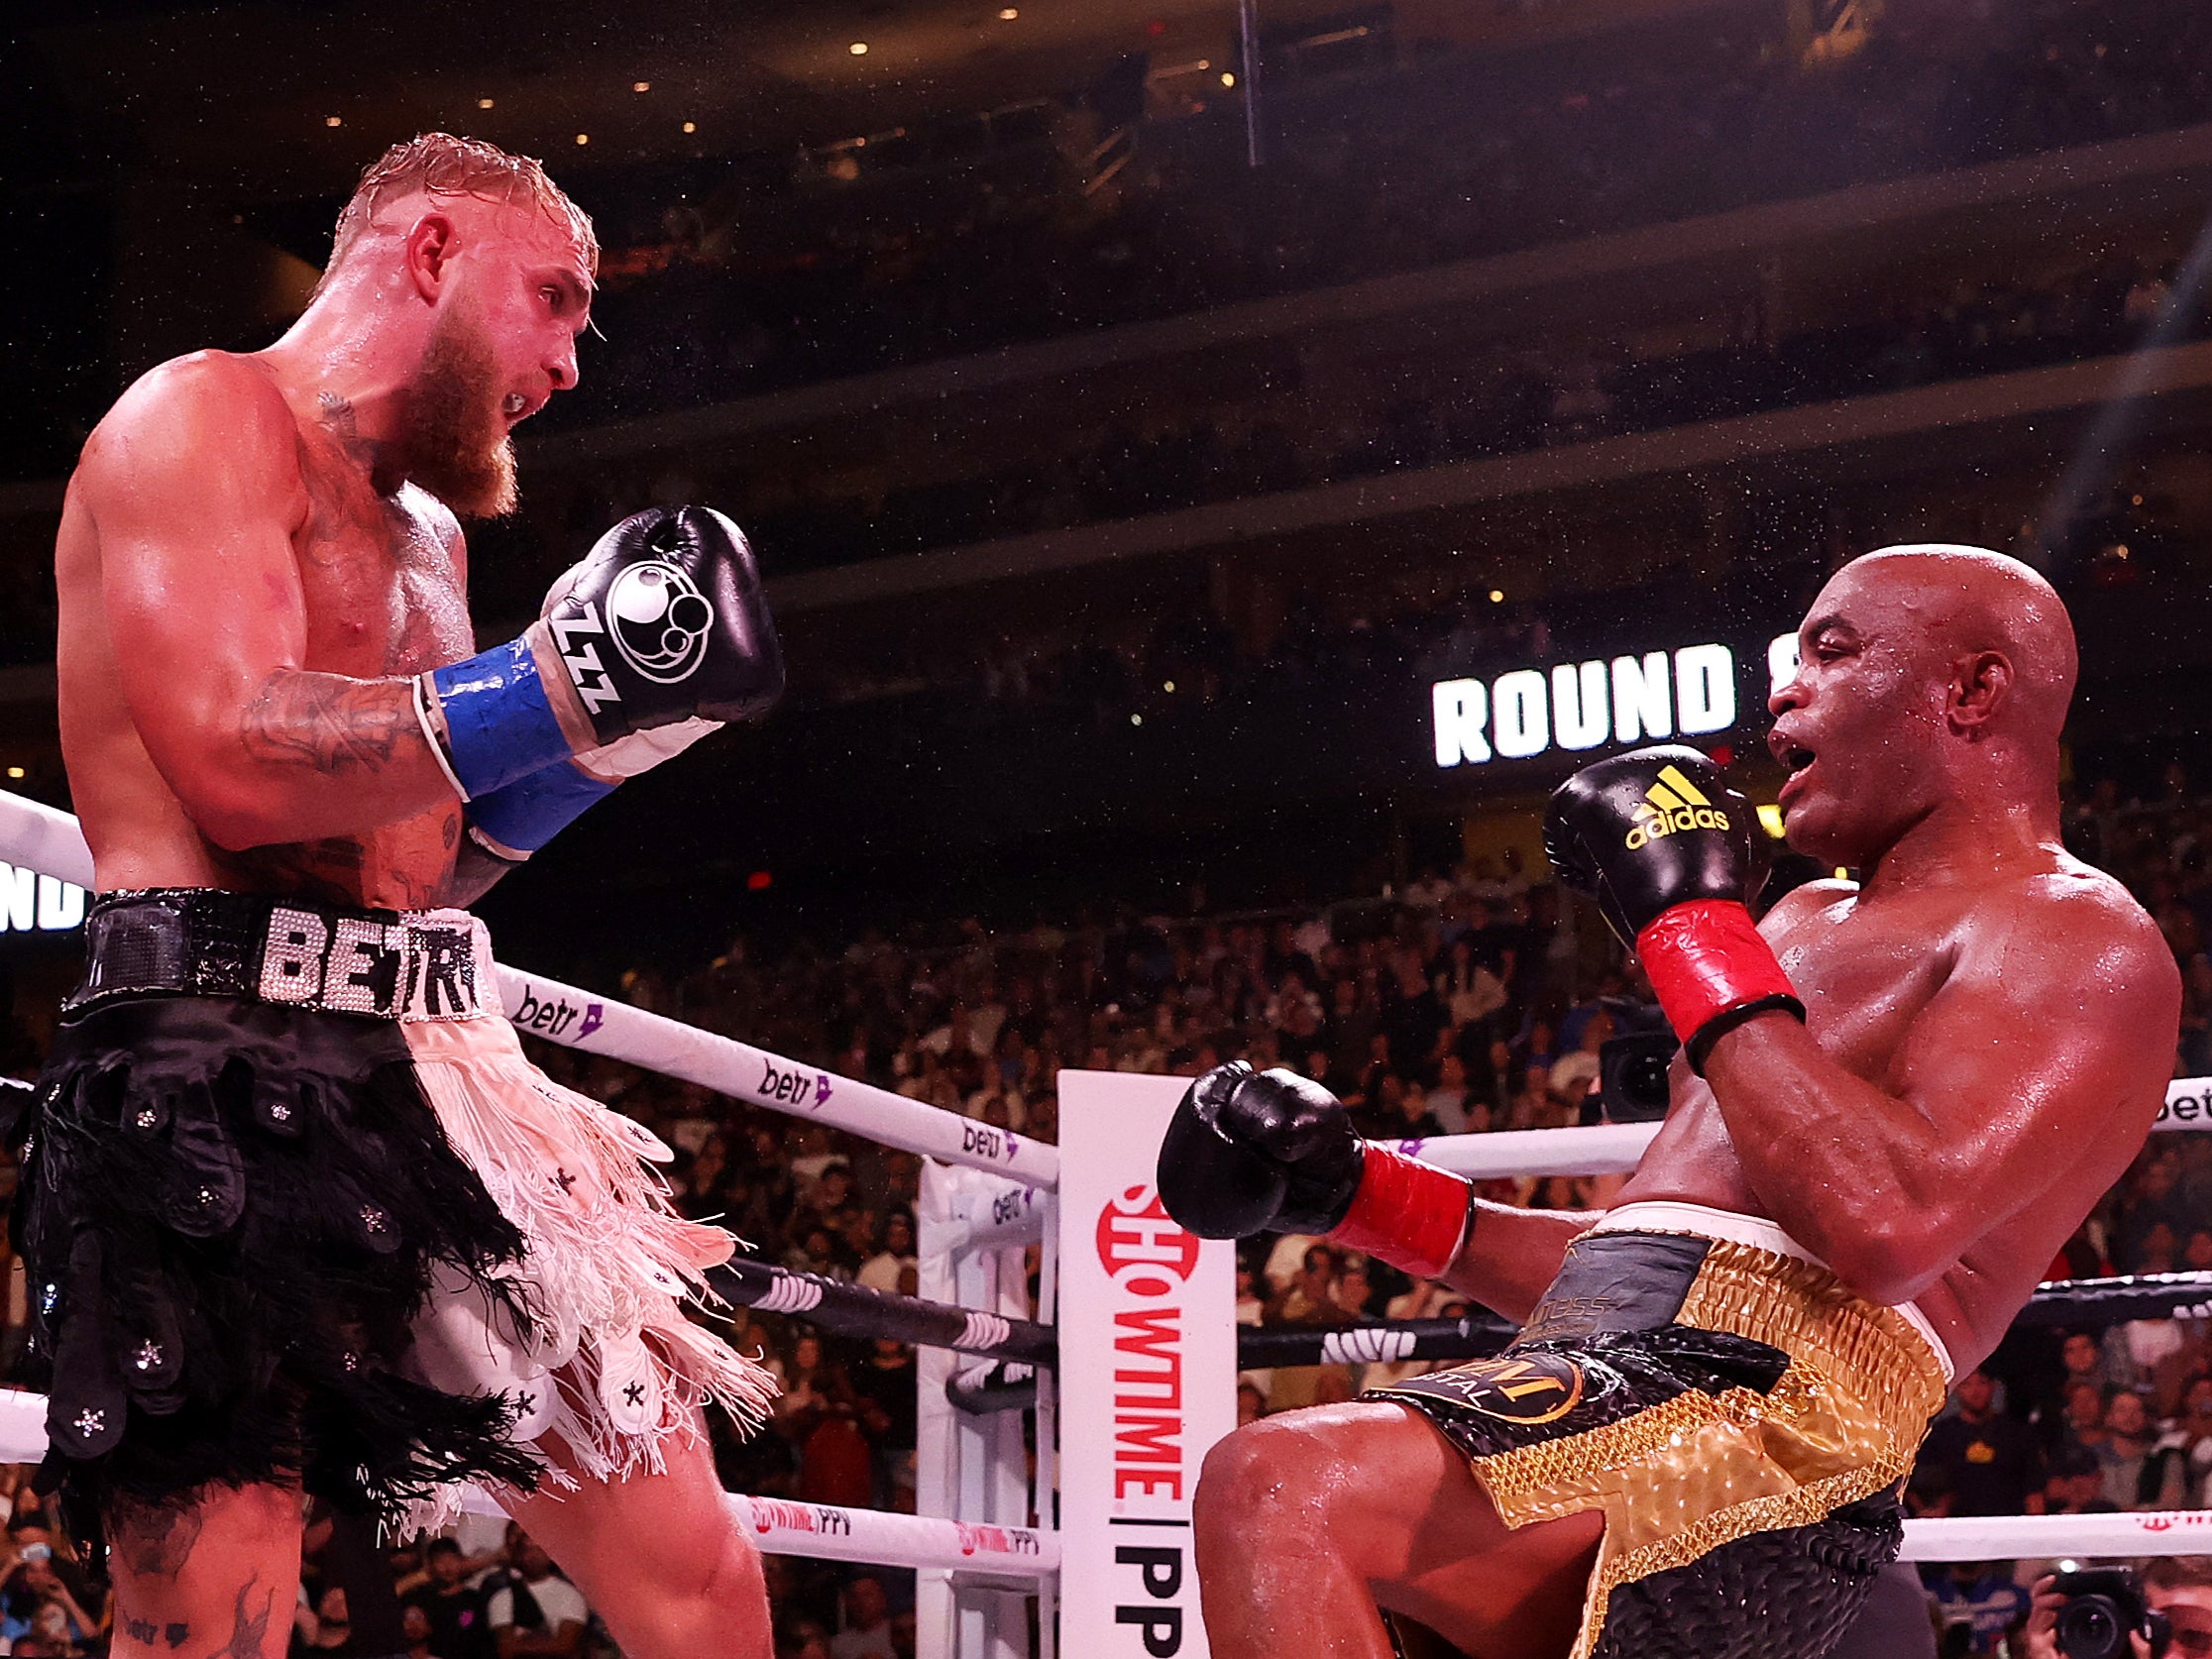 Jake Paul (left) knocked down Anderson Silva in the final round